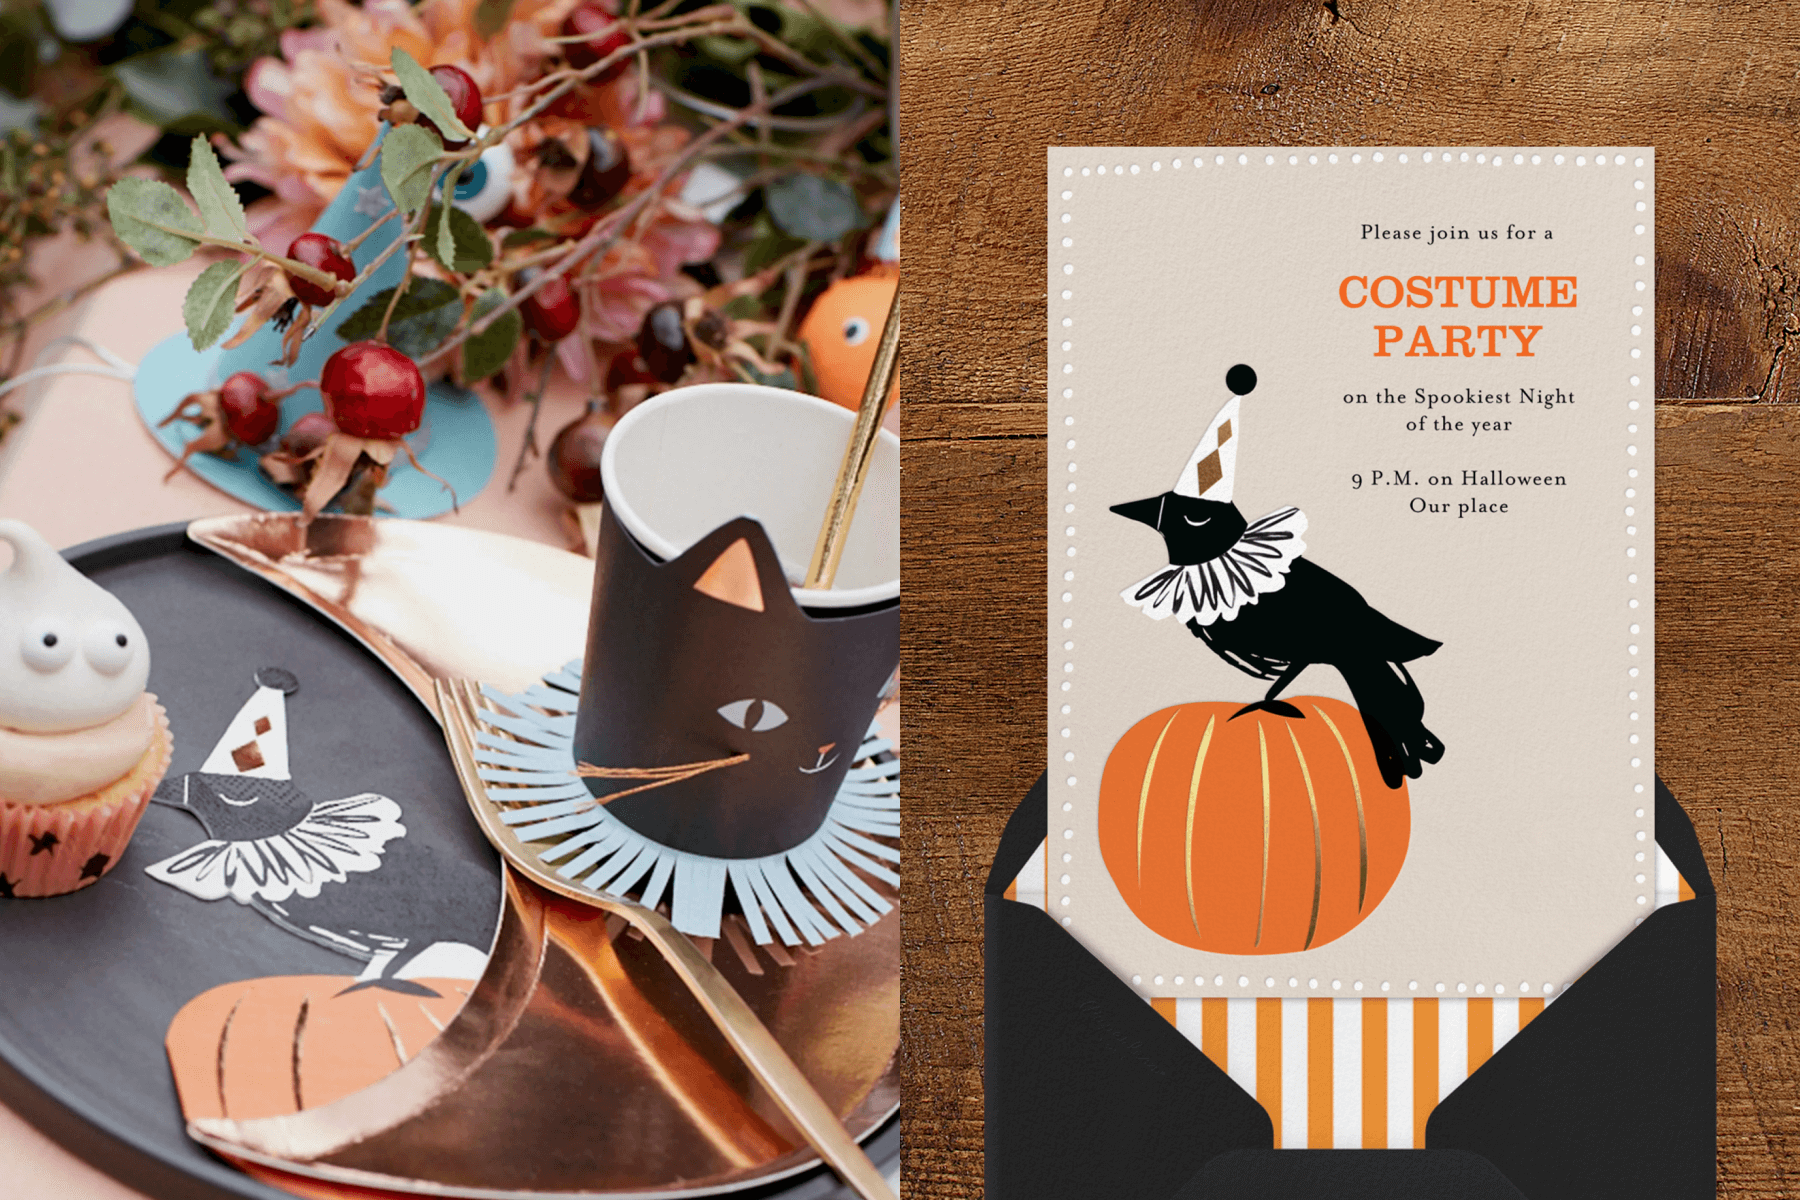 Left: A Halloween party table setting with a ghost cupcake, a black cat cup, and a raven napkin; right: A Halloween invitation with an illustration of a raven wearing a party hat sitting on a pumpkin.